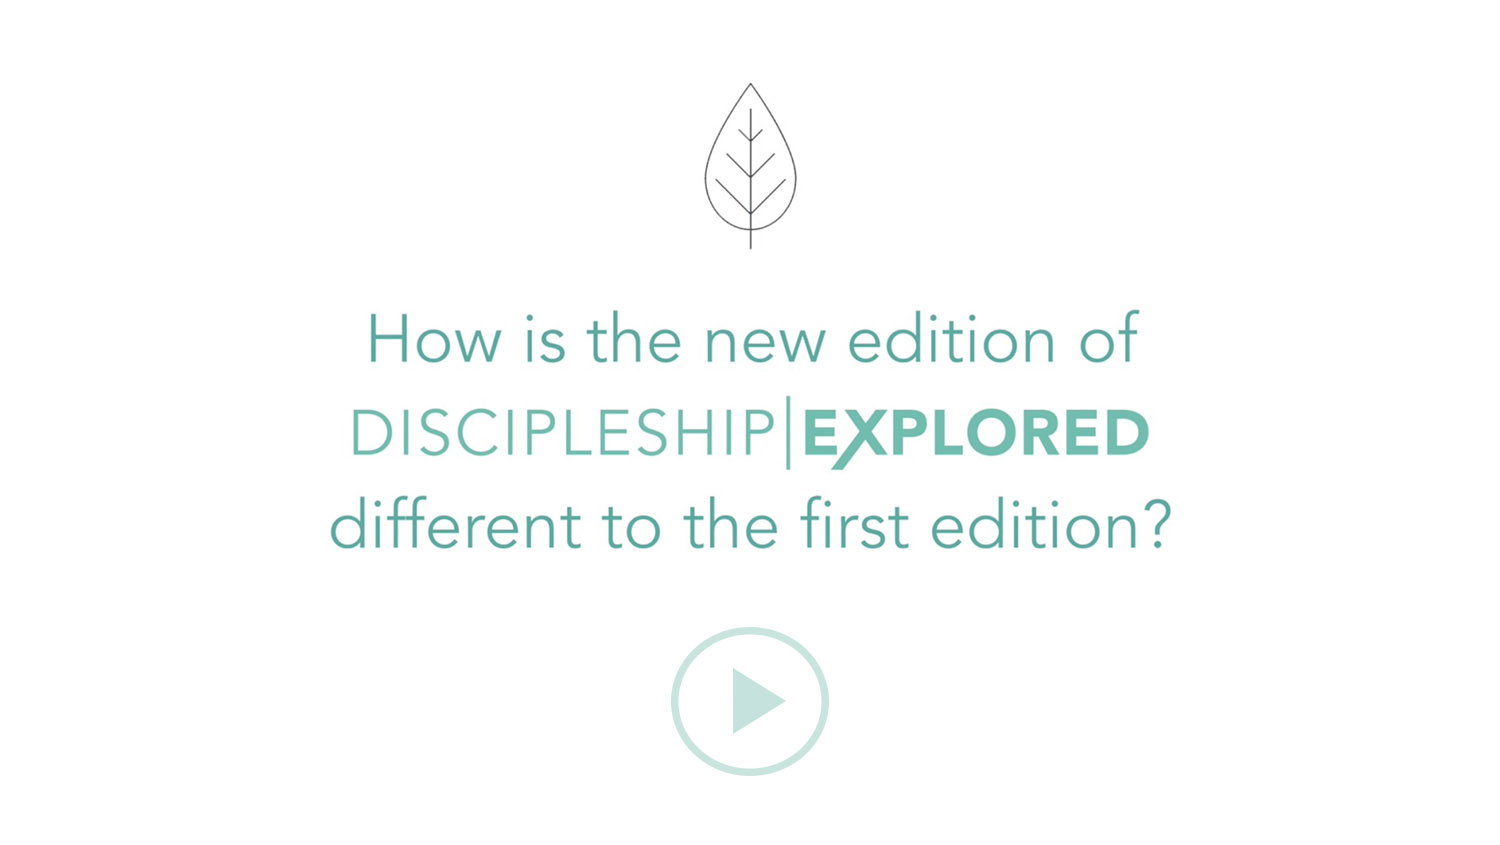 Question 1*How is the new edition of Discipleship Explored different to the first edition?